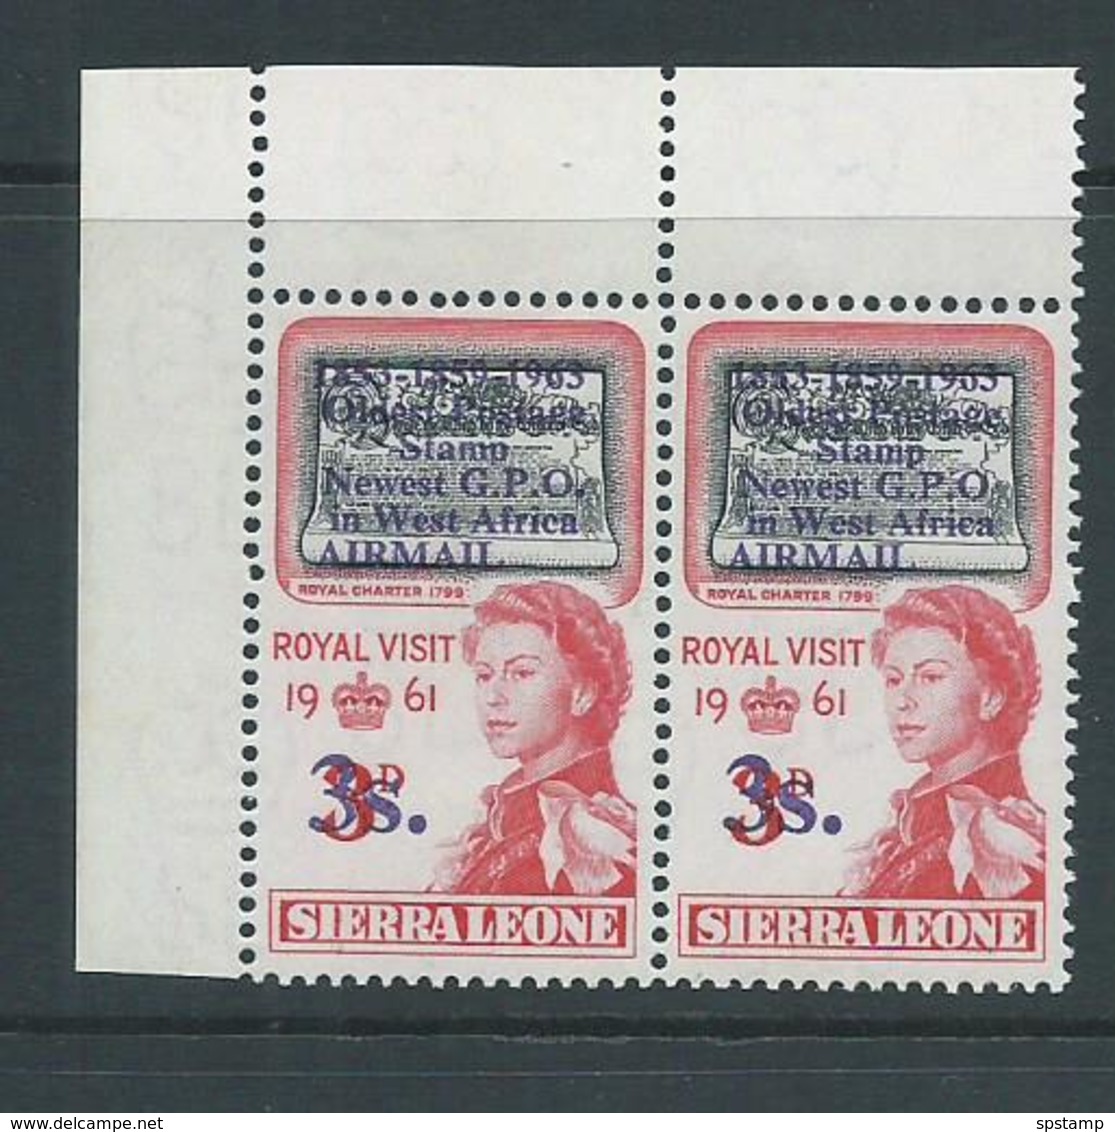 Sierra Leone 1963 Postal Anniversary 3 Shilling  " Missing Period After O " Variety MNH - Sierra Leone (1961-...)